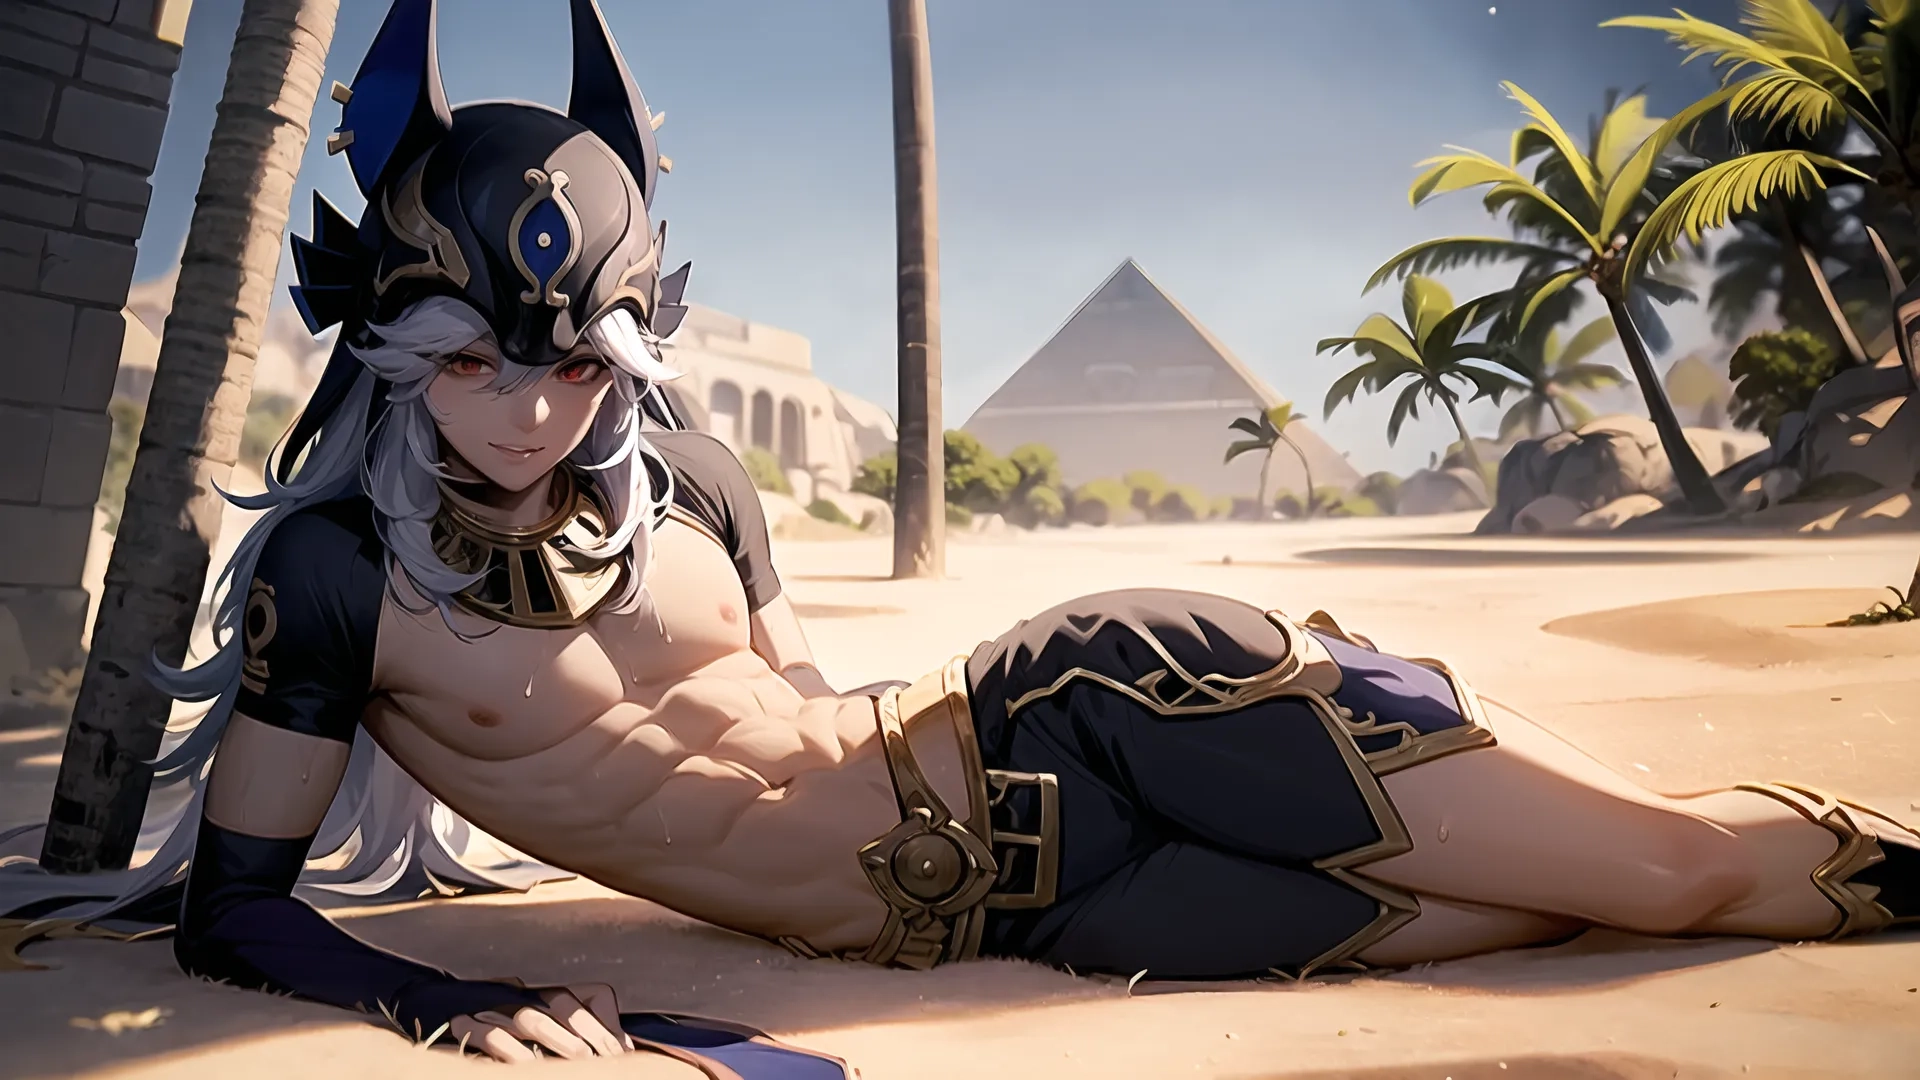 a woman laying in the shade near palm trees, and egyptian pyramids in the background is a scene from a video game set with a female warrior
